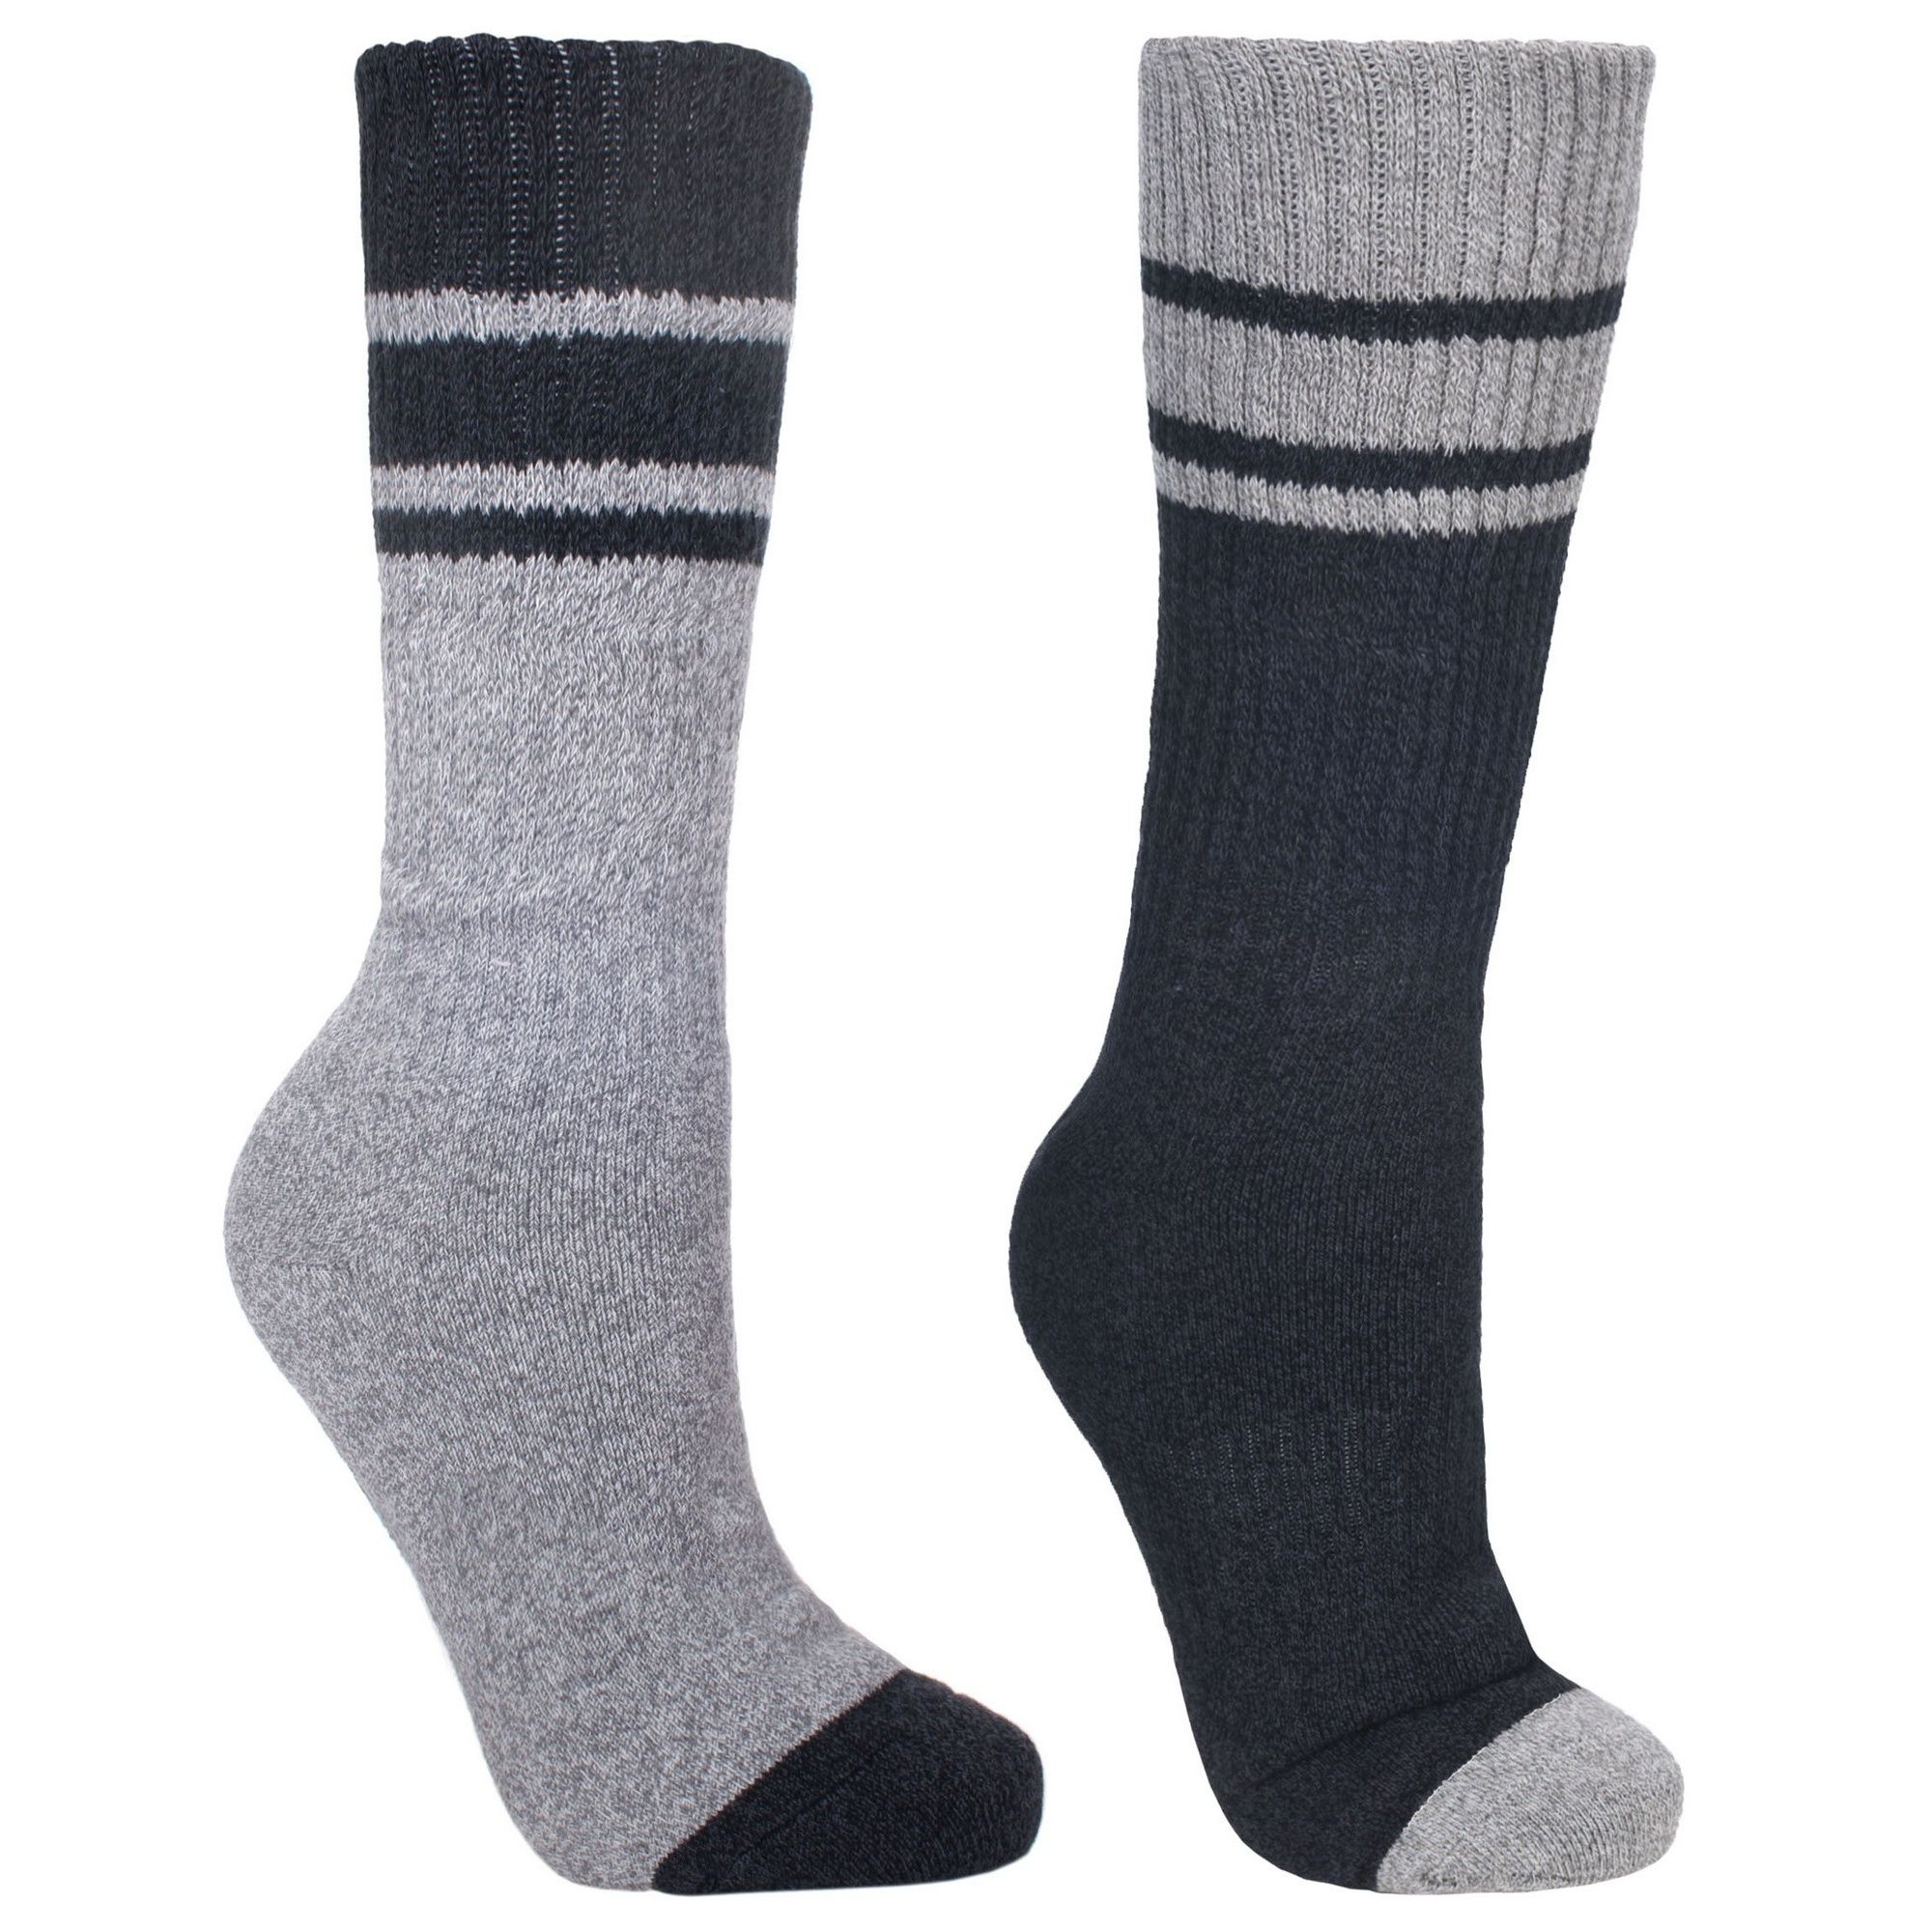 Mens two tone boot socks. Two pairs per pack. Tactel lining to prevent blisters. Choice of 2 sizes: UK 4-7, UK 7-11. Cotton 74%, Acrylic 16%, Polyamide 9%, Elastane 1%.